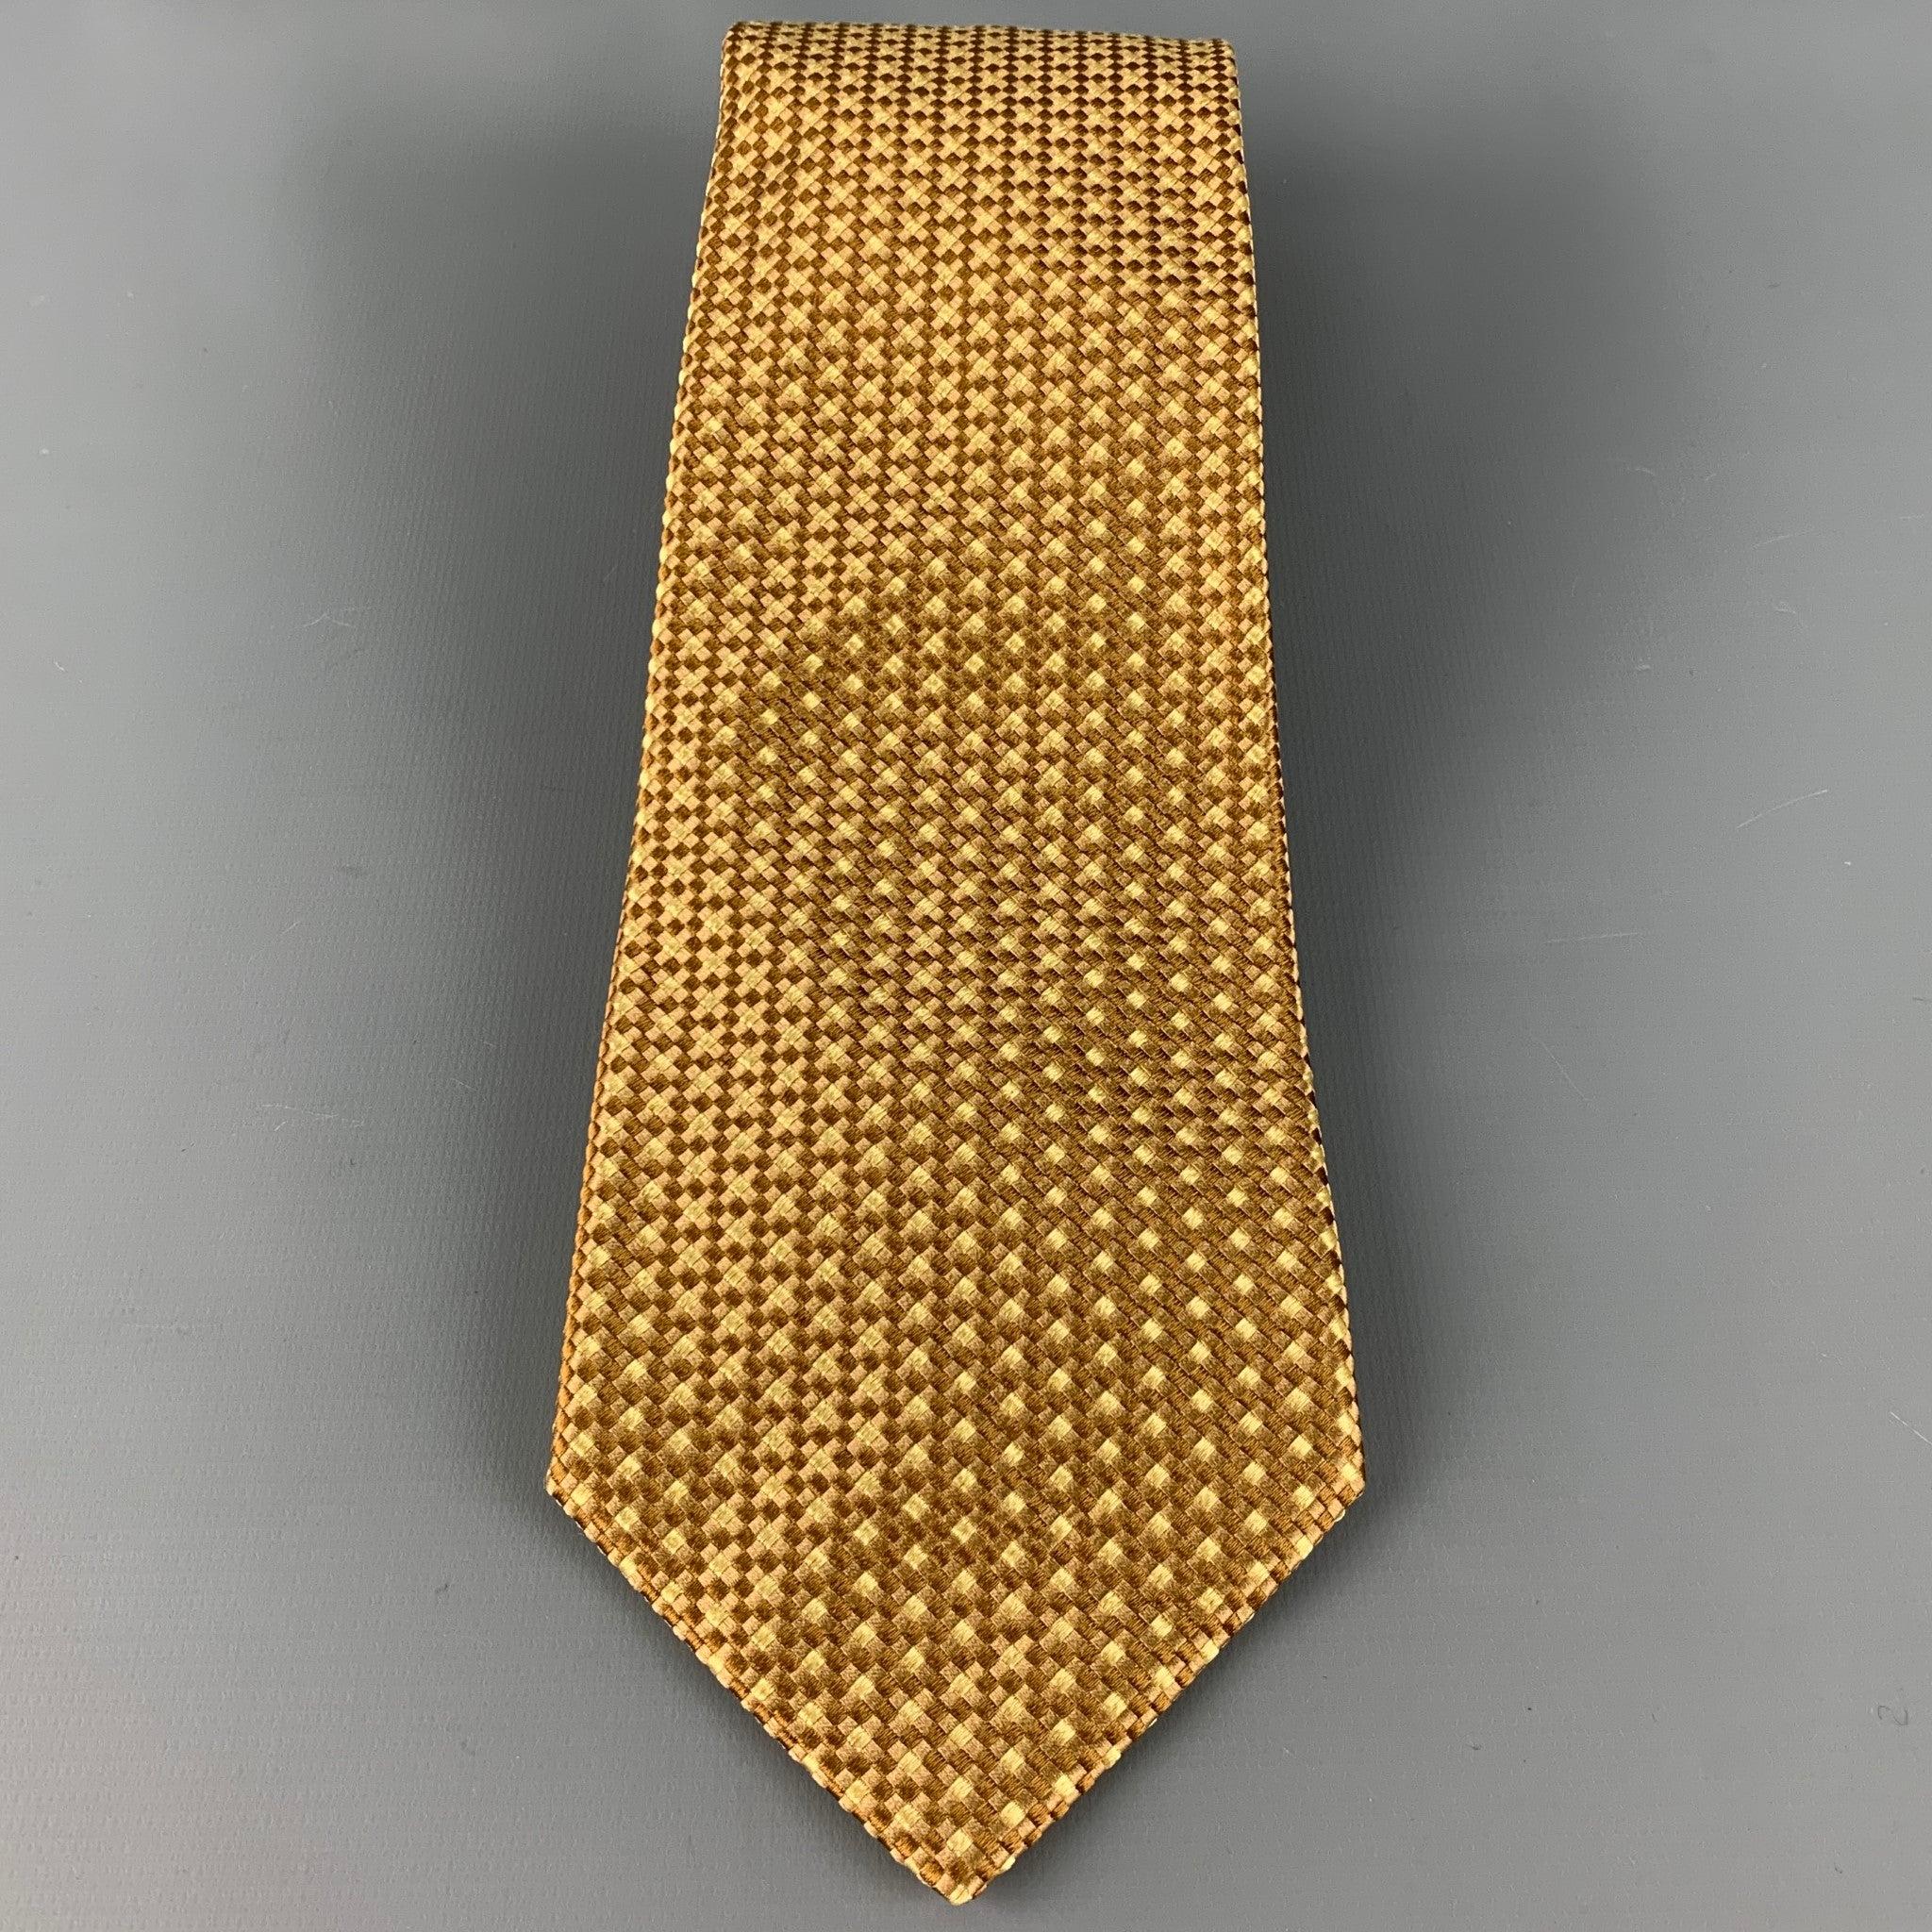 BORRELLI
tie in 100% silk, featuring a beige and taupe checkered pattern. Made in Italy.Very Good Pre-Owned Condition. 

Measurements: 
  Width: 4 inches Length: 57.5 inches 
  
  
 
Reference: 126595
Category: Tie
More Details
    
Brand: 